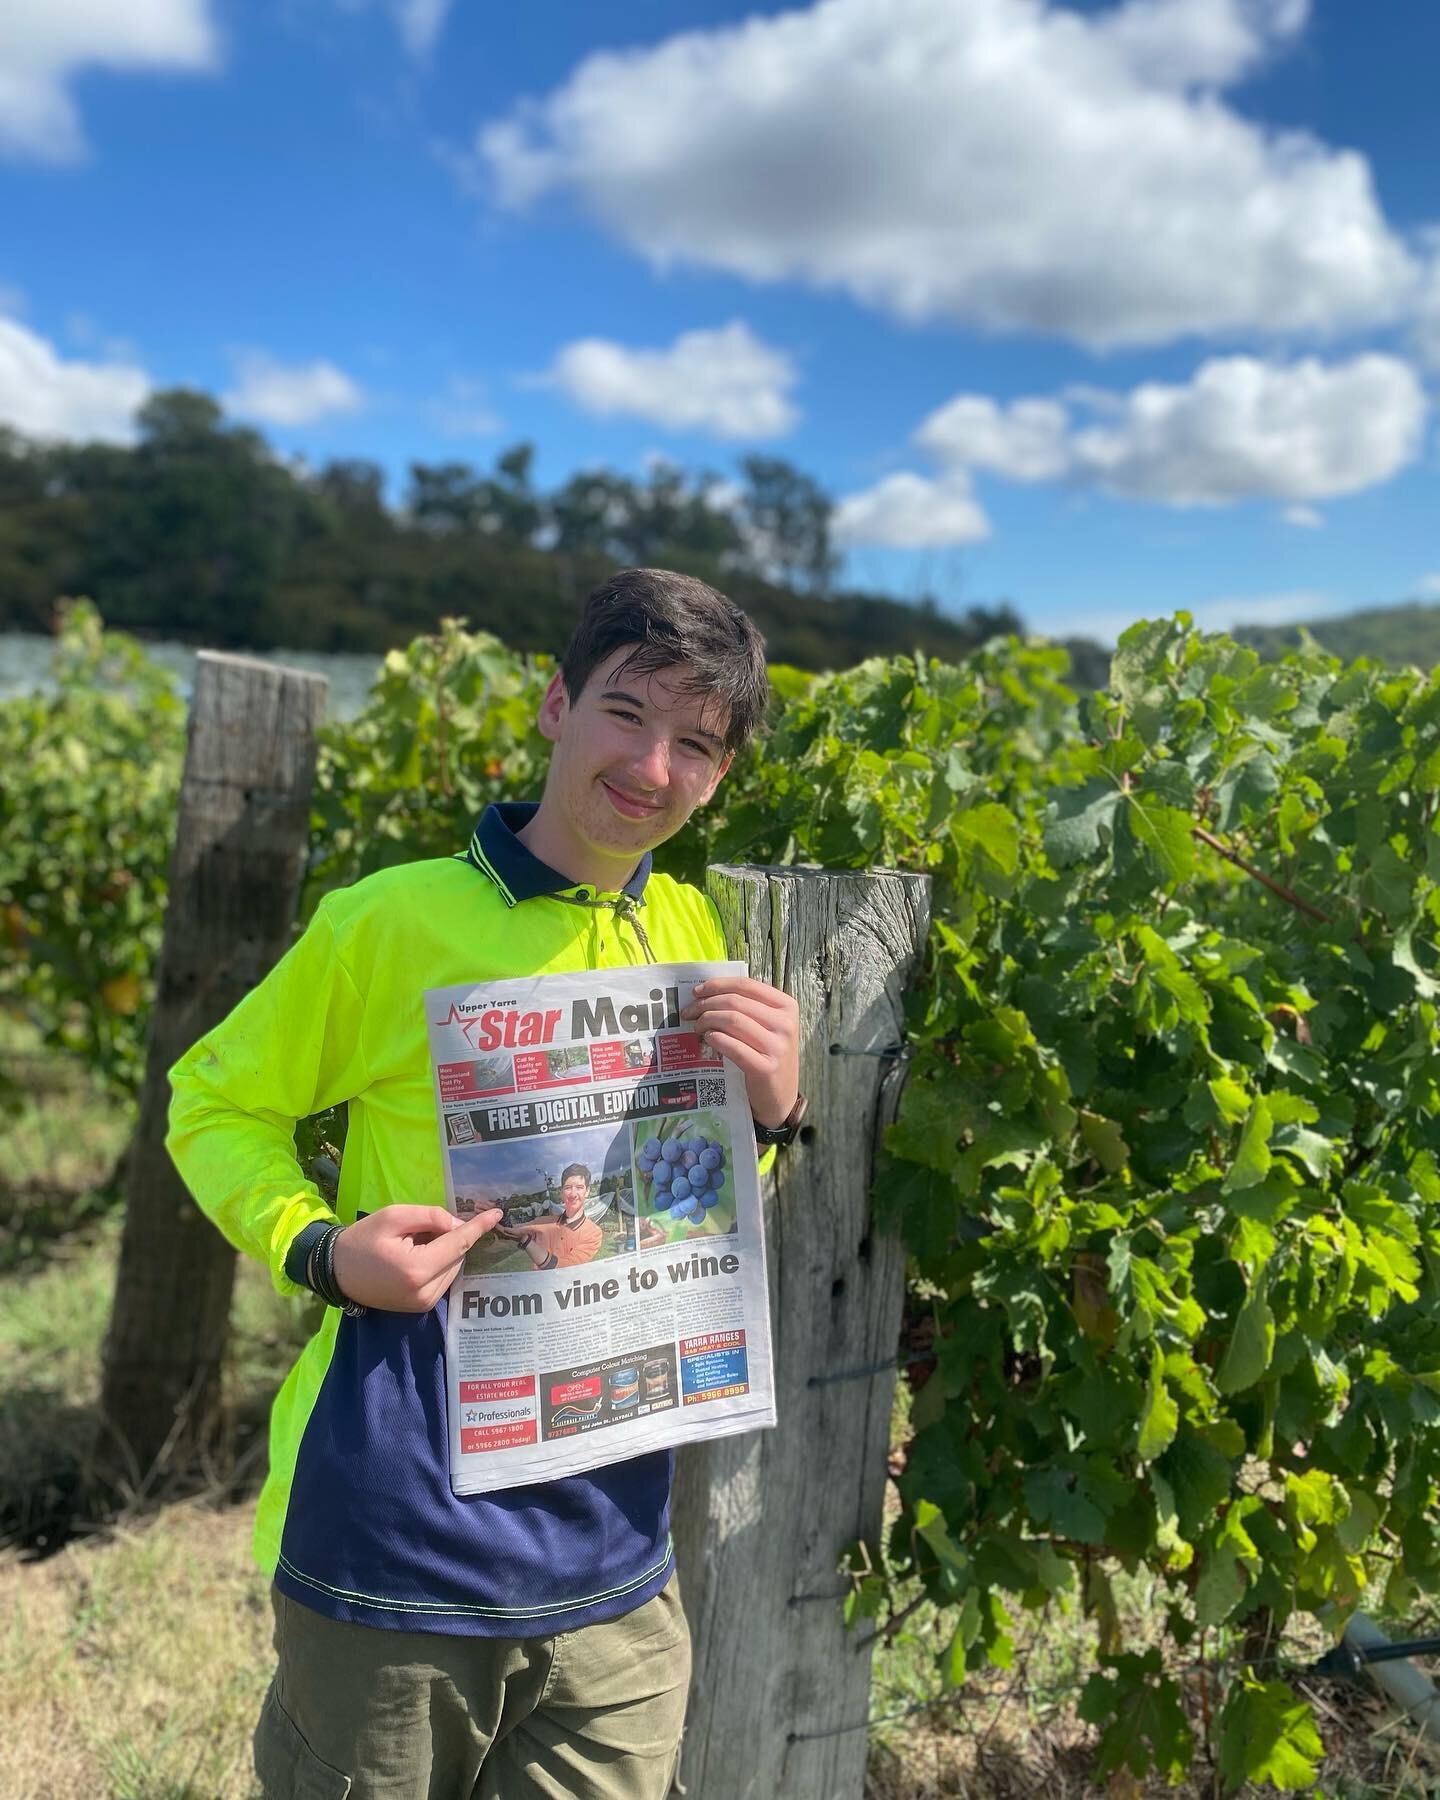 Here&rsquo;s our main man Tyler ! He&rsquo;s doing work experience here with us once a week as part of his Year 10 Wine Industry Operations certificate and managed to score the cover shot for local newspaper @starmailnews 
Great to help out and suppo